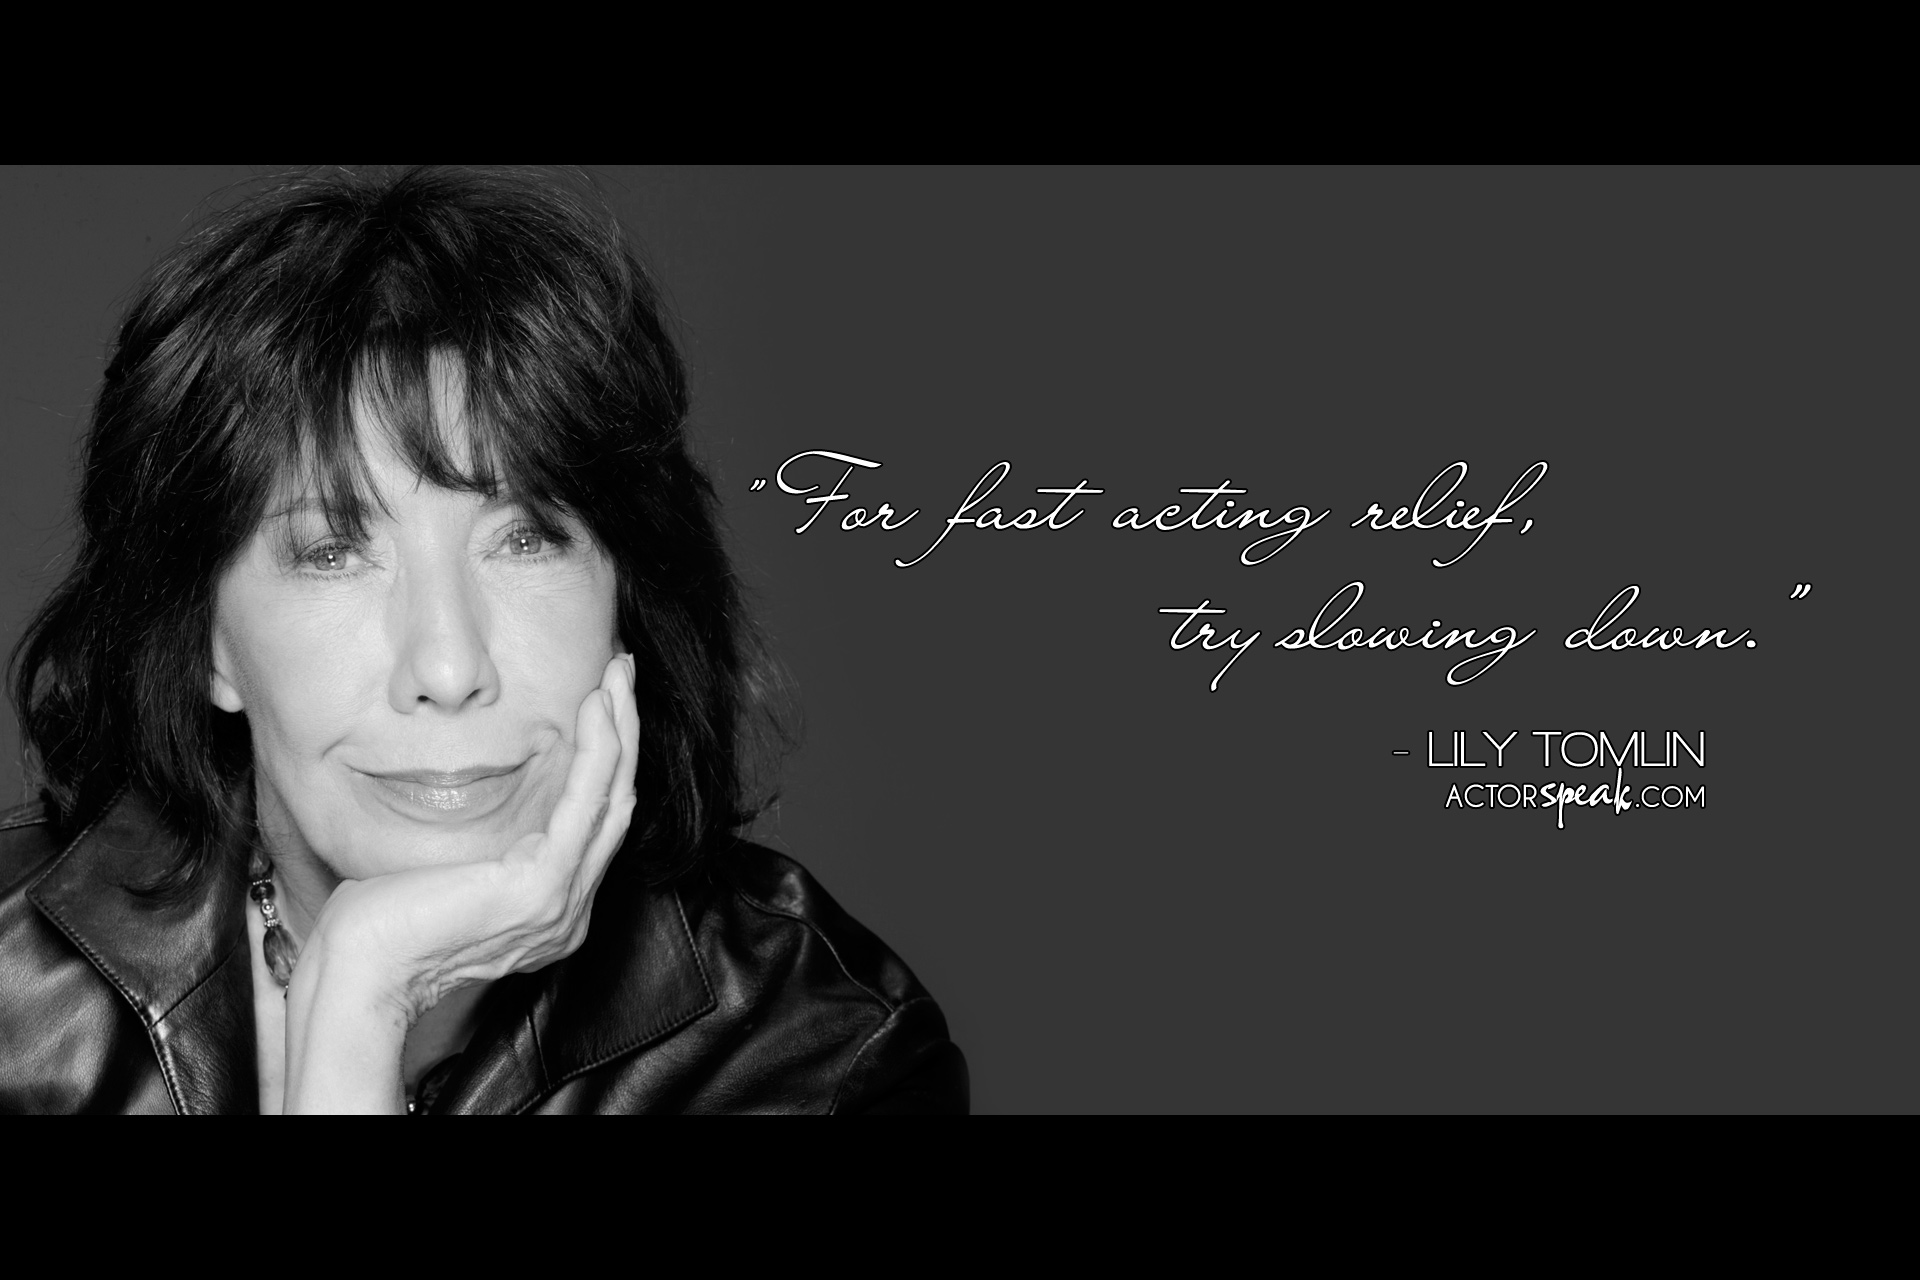 Lily Tomlin's quote #4